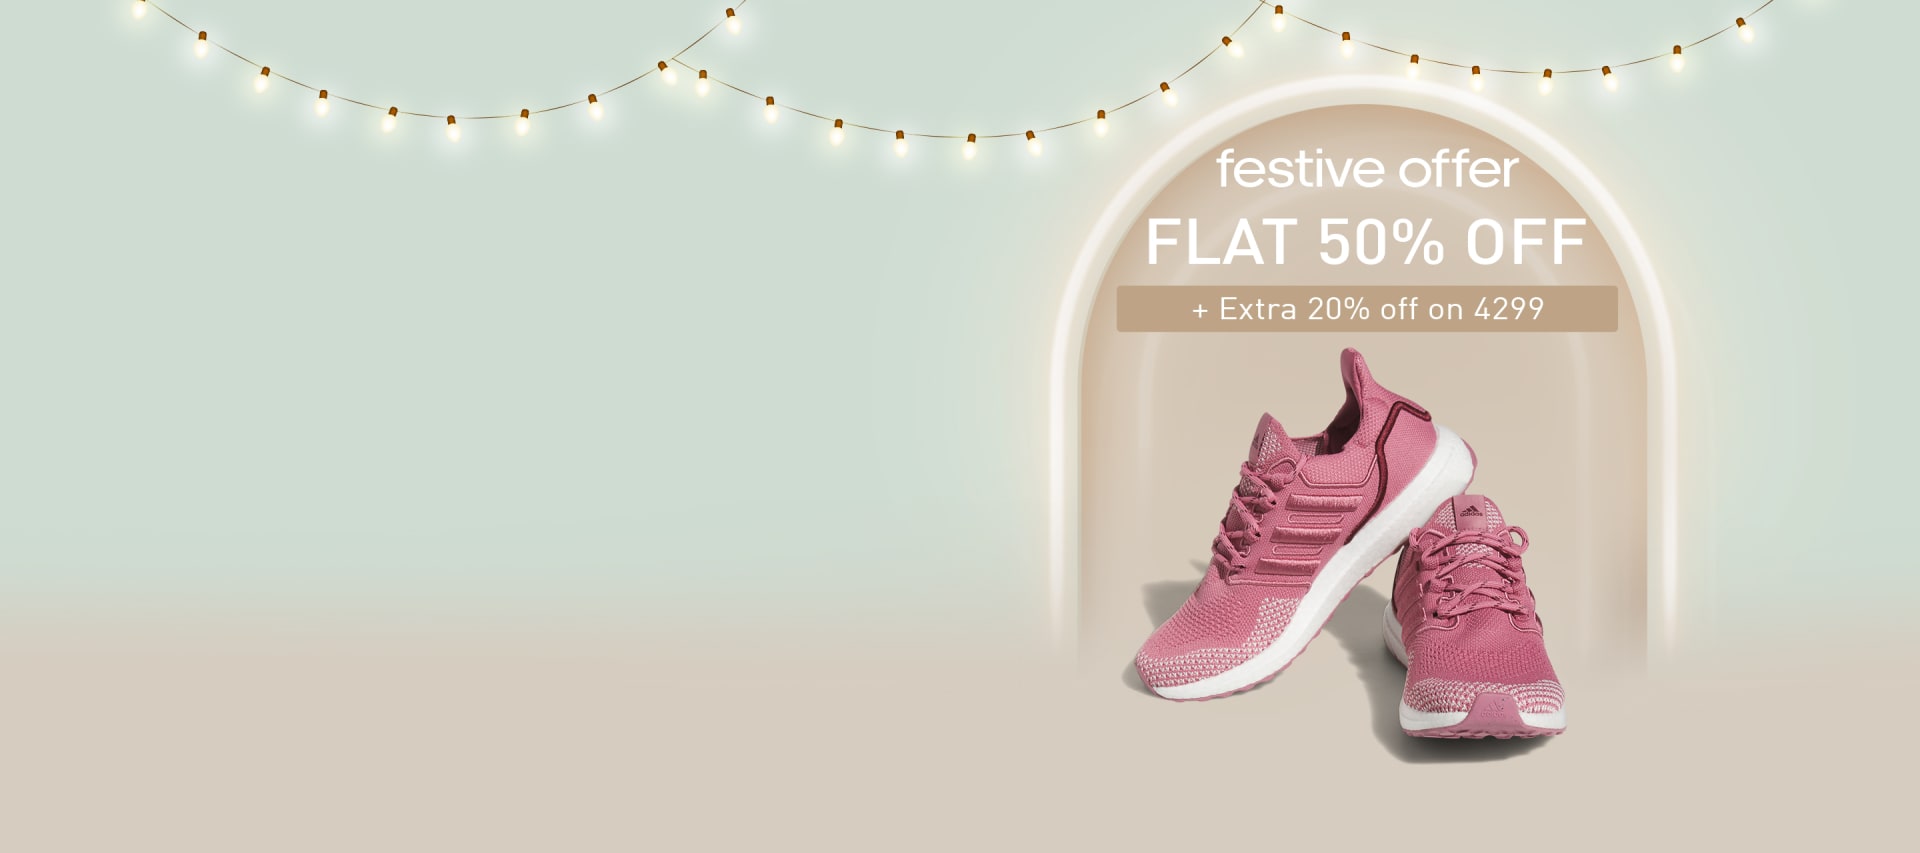 Womens Shoes, Clothing Accessories | Free Shipping - adidas India